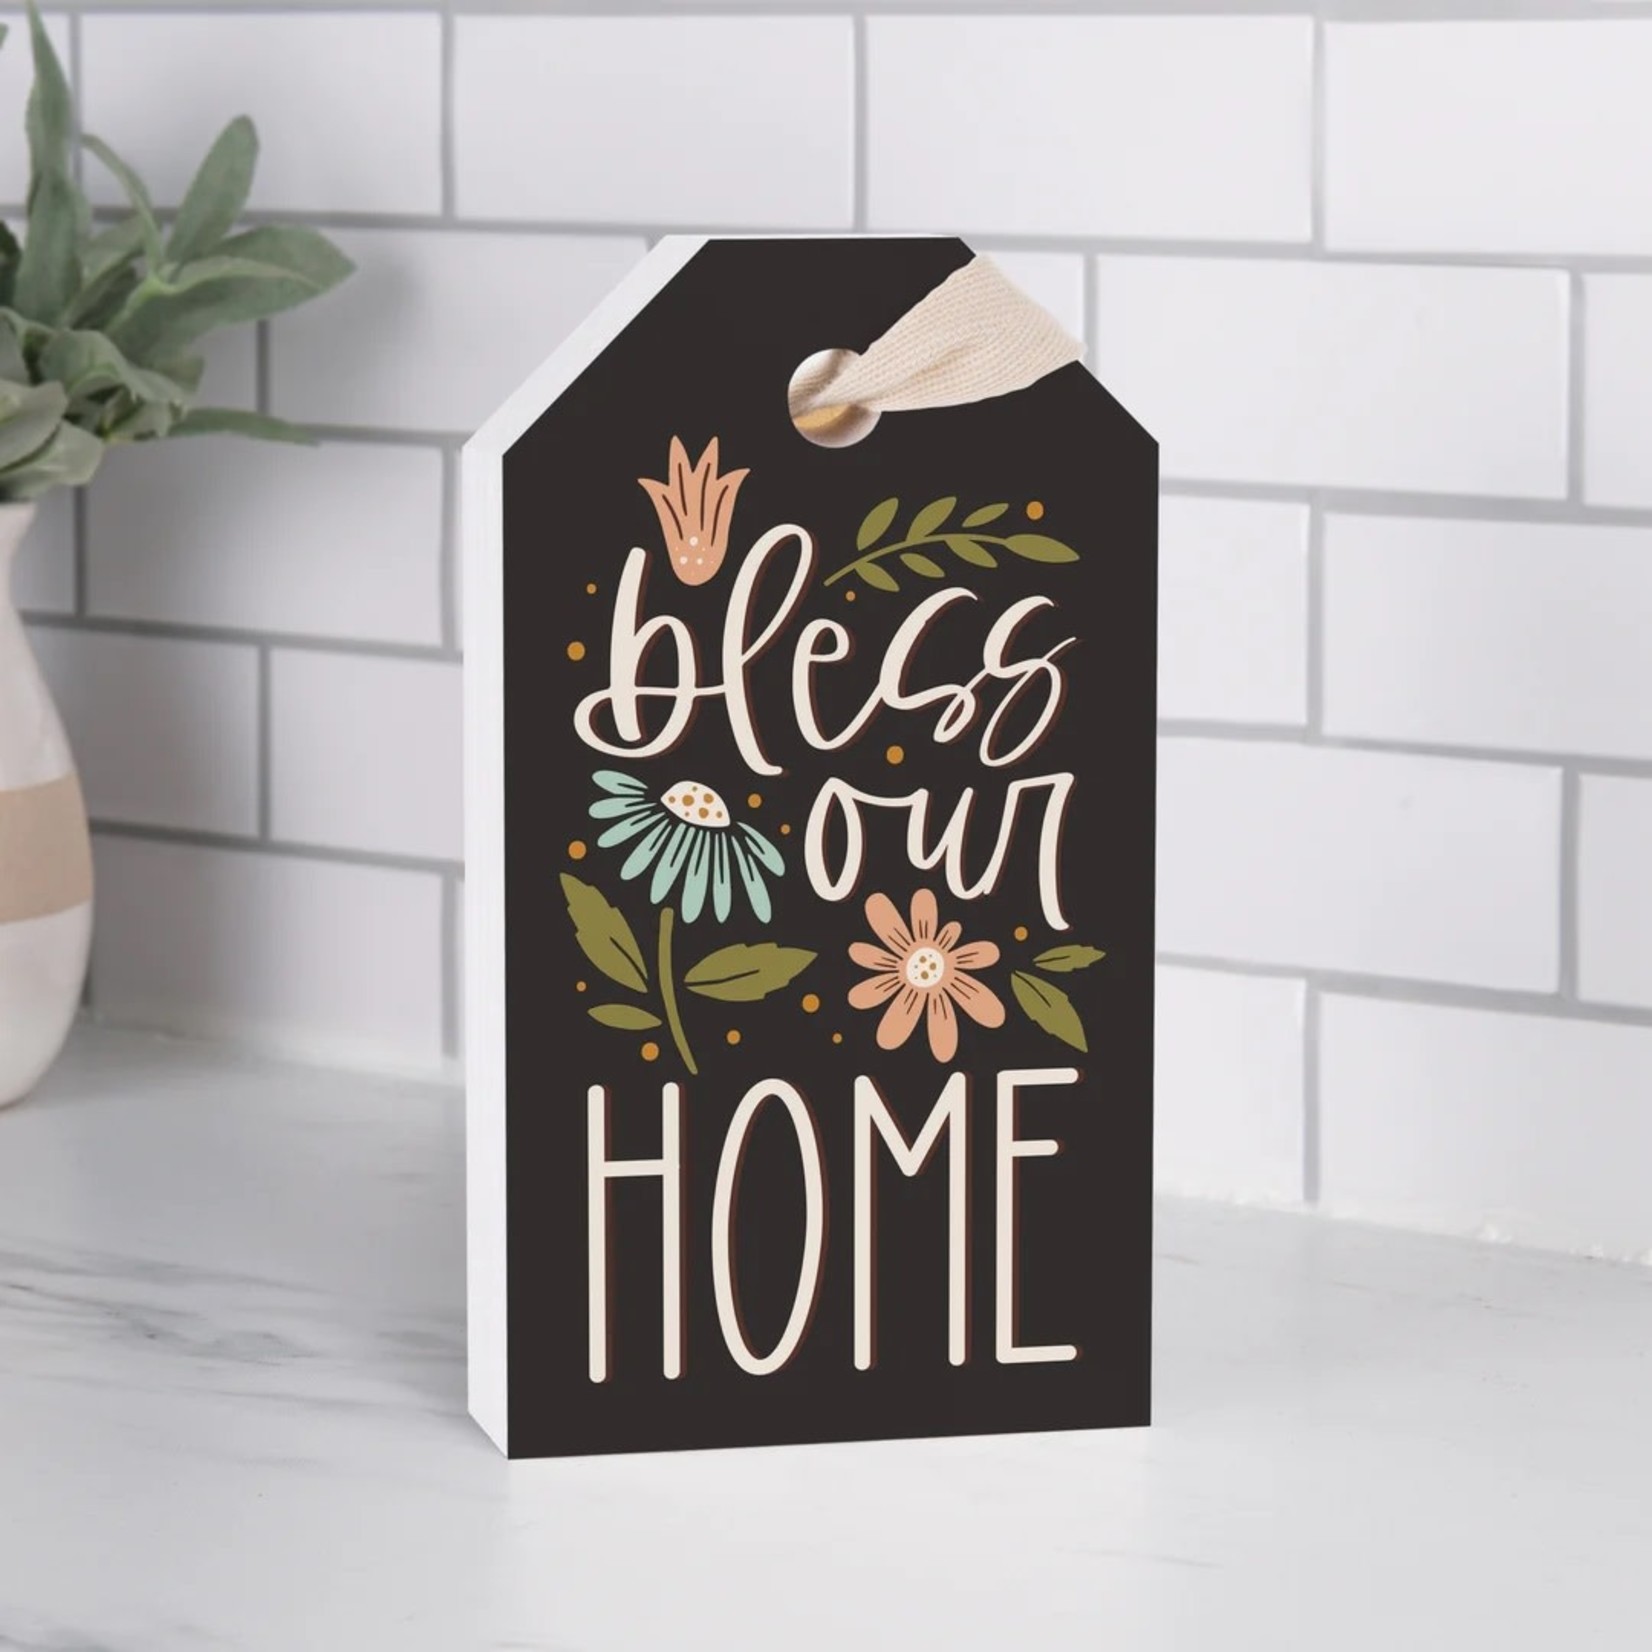 BLESS OUR HOME 4X7 WOODEN BLOCK